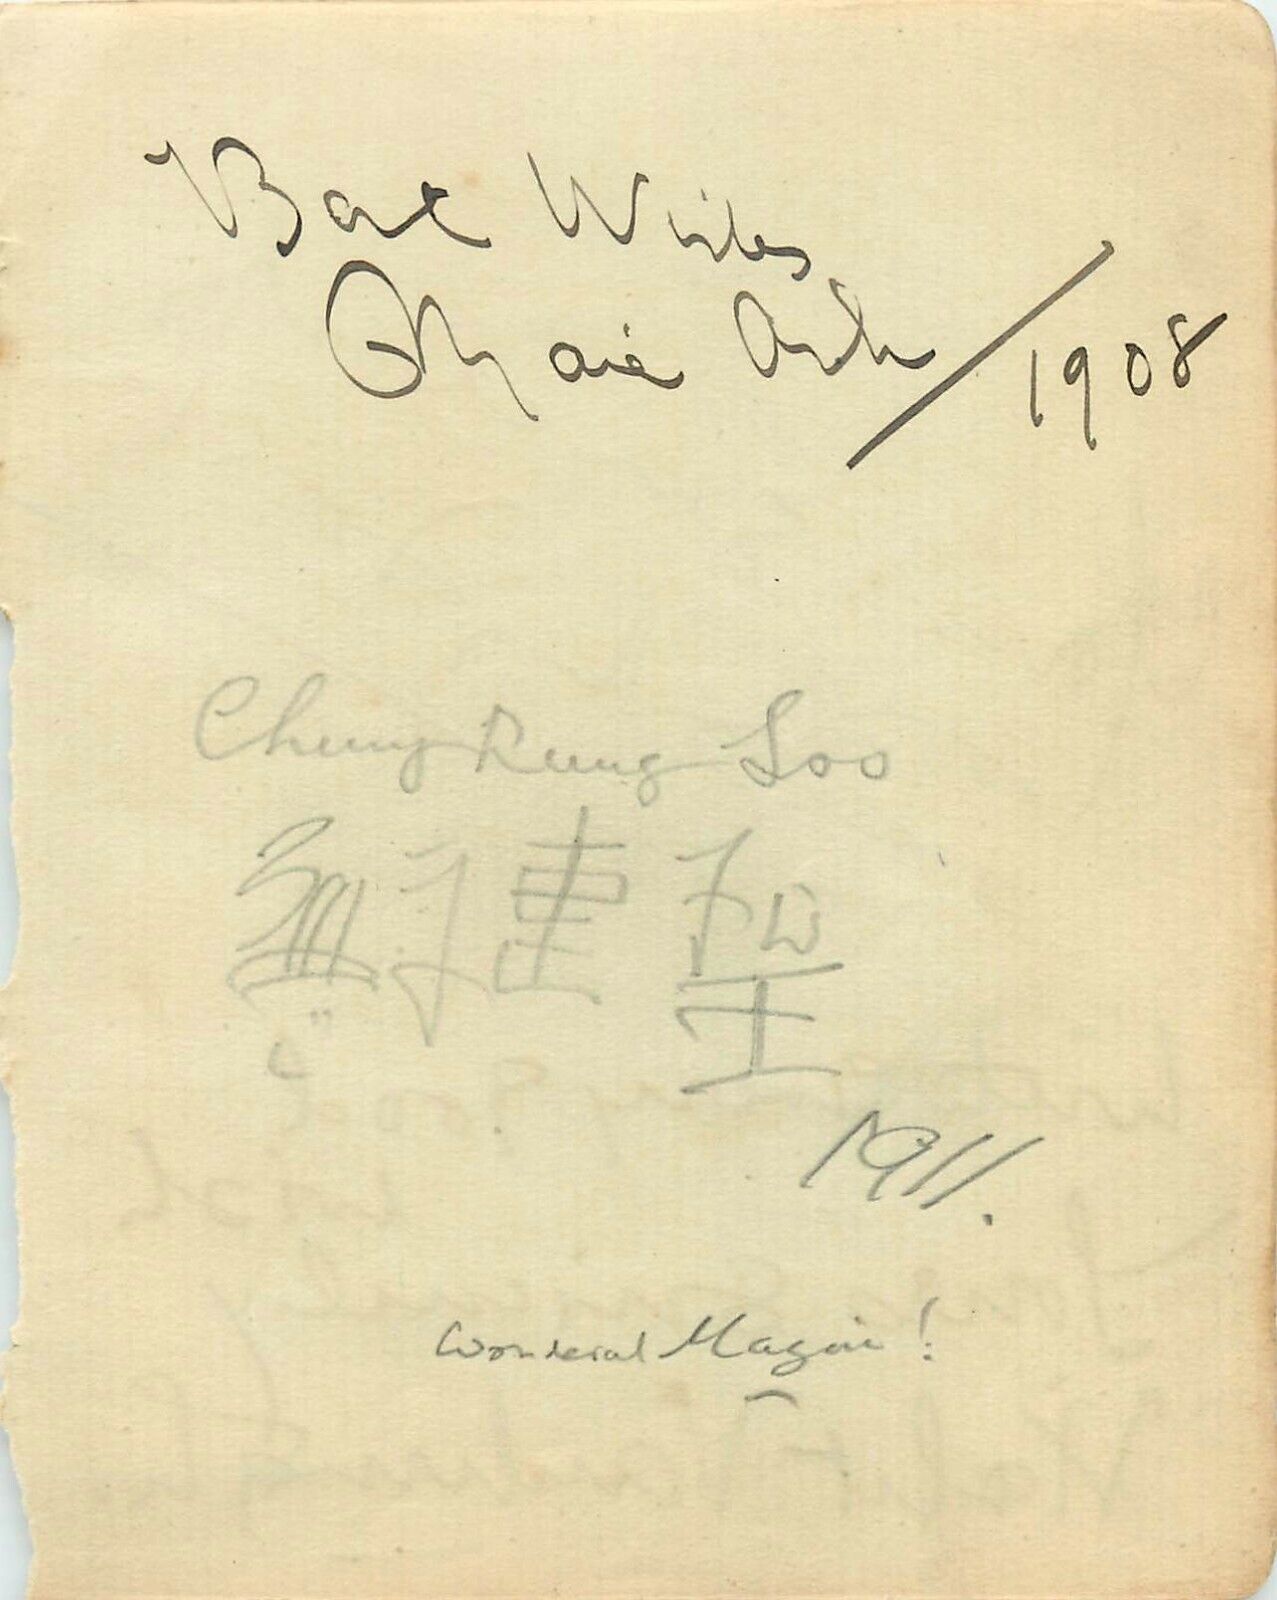 Vintage Signed Autograph - US Magician Chung Ling Soo - Died Bullet Catch Trick